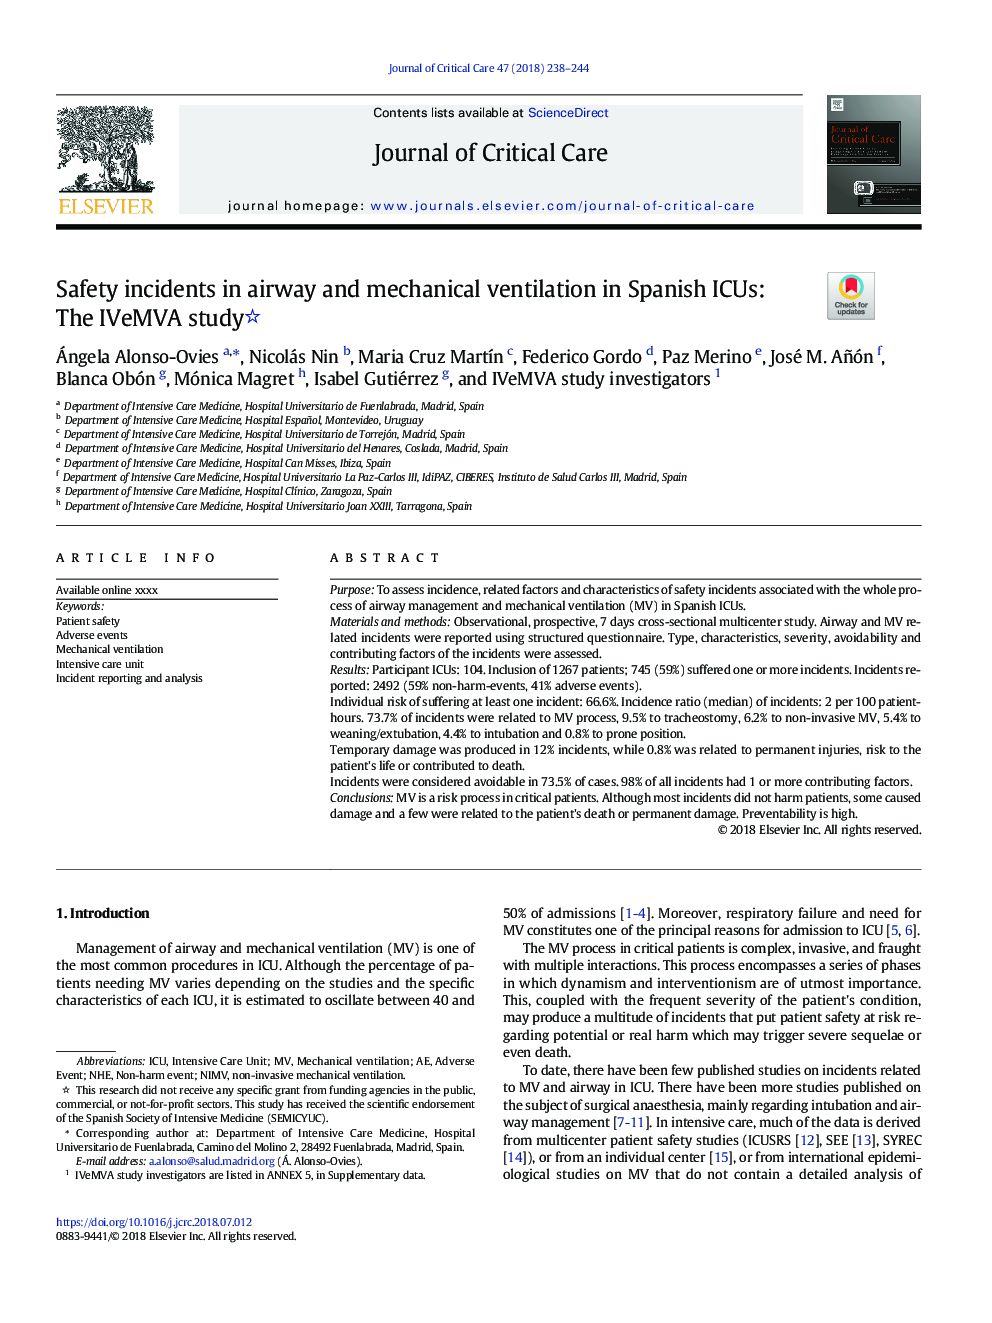 Safety incidents in airway and mechanical ventilation in Spanish ICUs: The IVeMVA study